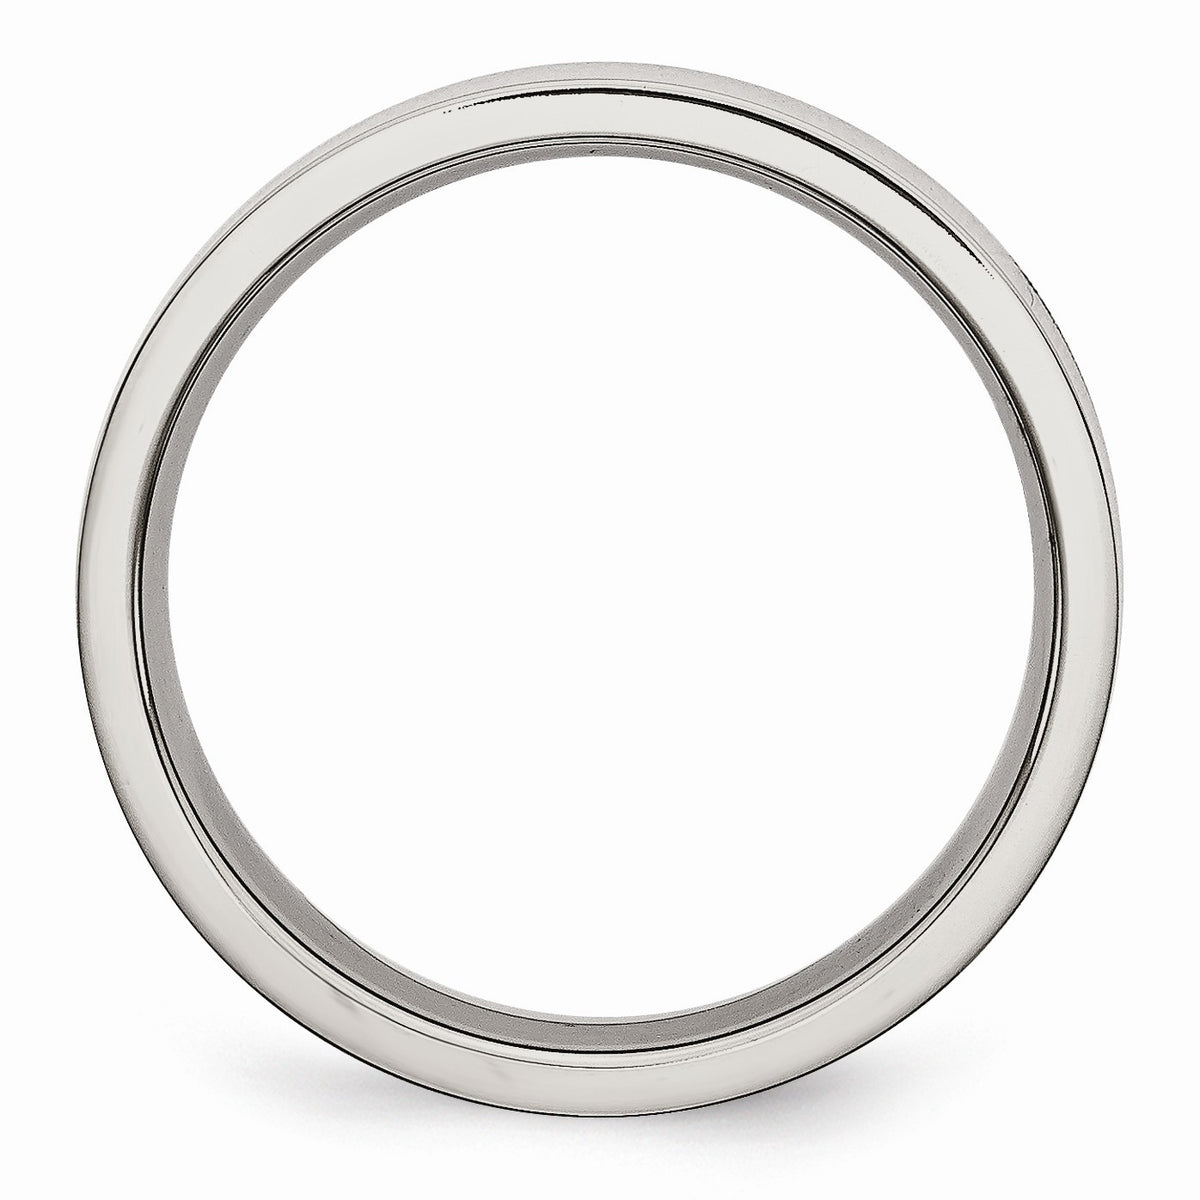 Alternate view of the 5mm Polished Stainless Steel Flat Comfort Fit Wedding Band by The Black Bow Jewelry Co.